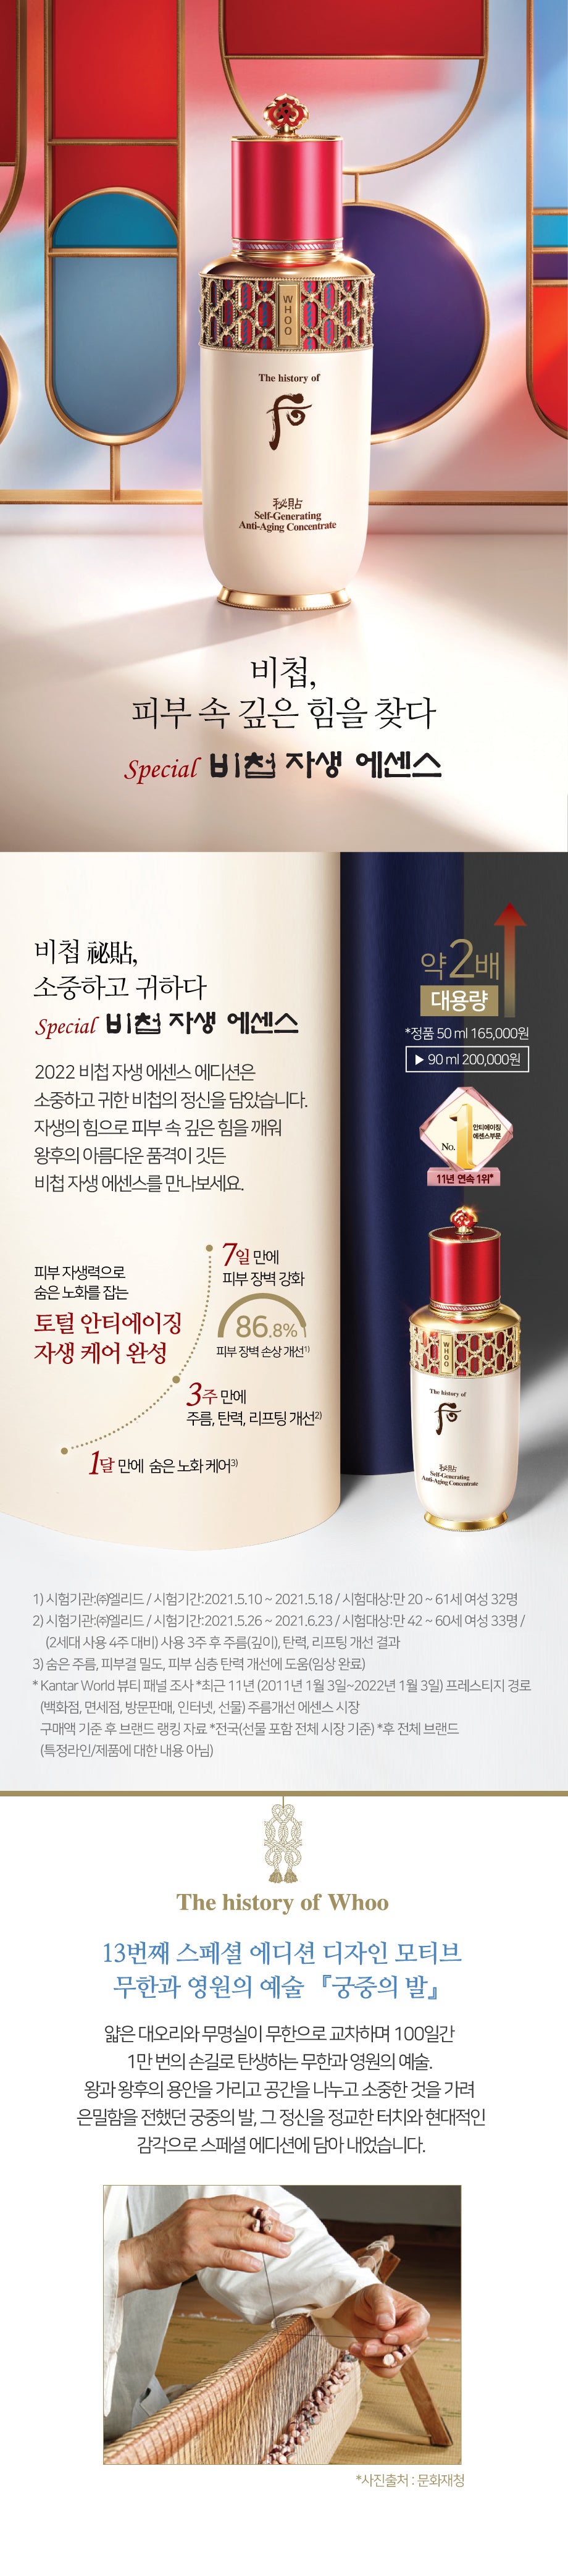 The History Of Whoo_Bichup Self Generating Antiaging Concentrate Special Edition_1